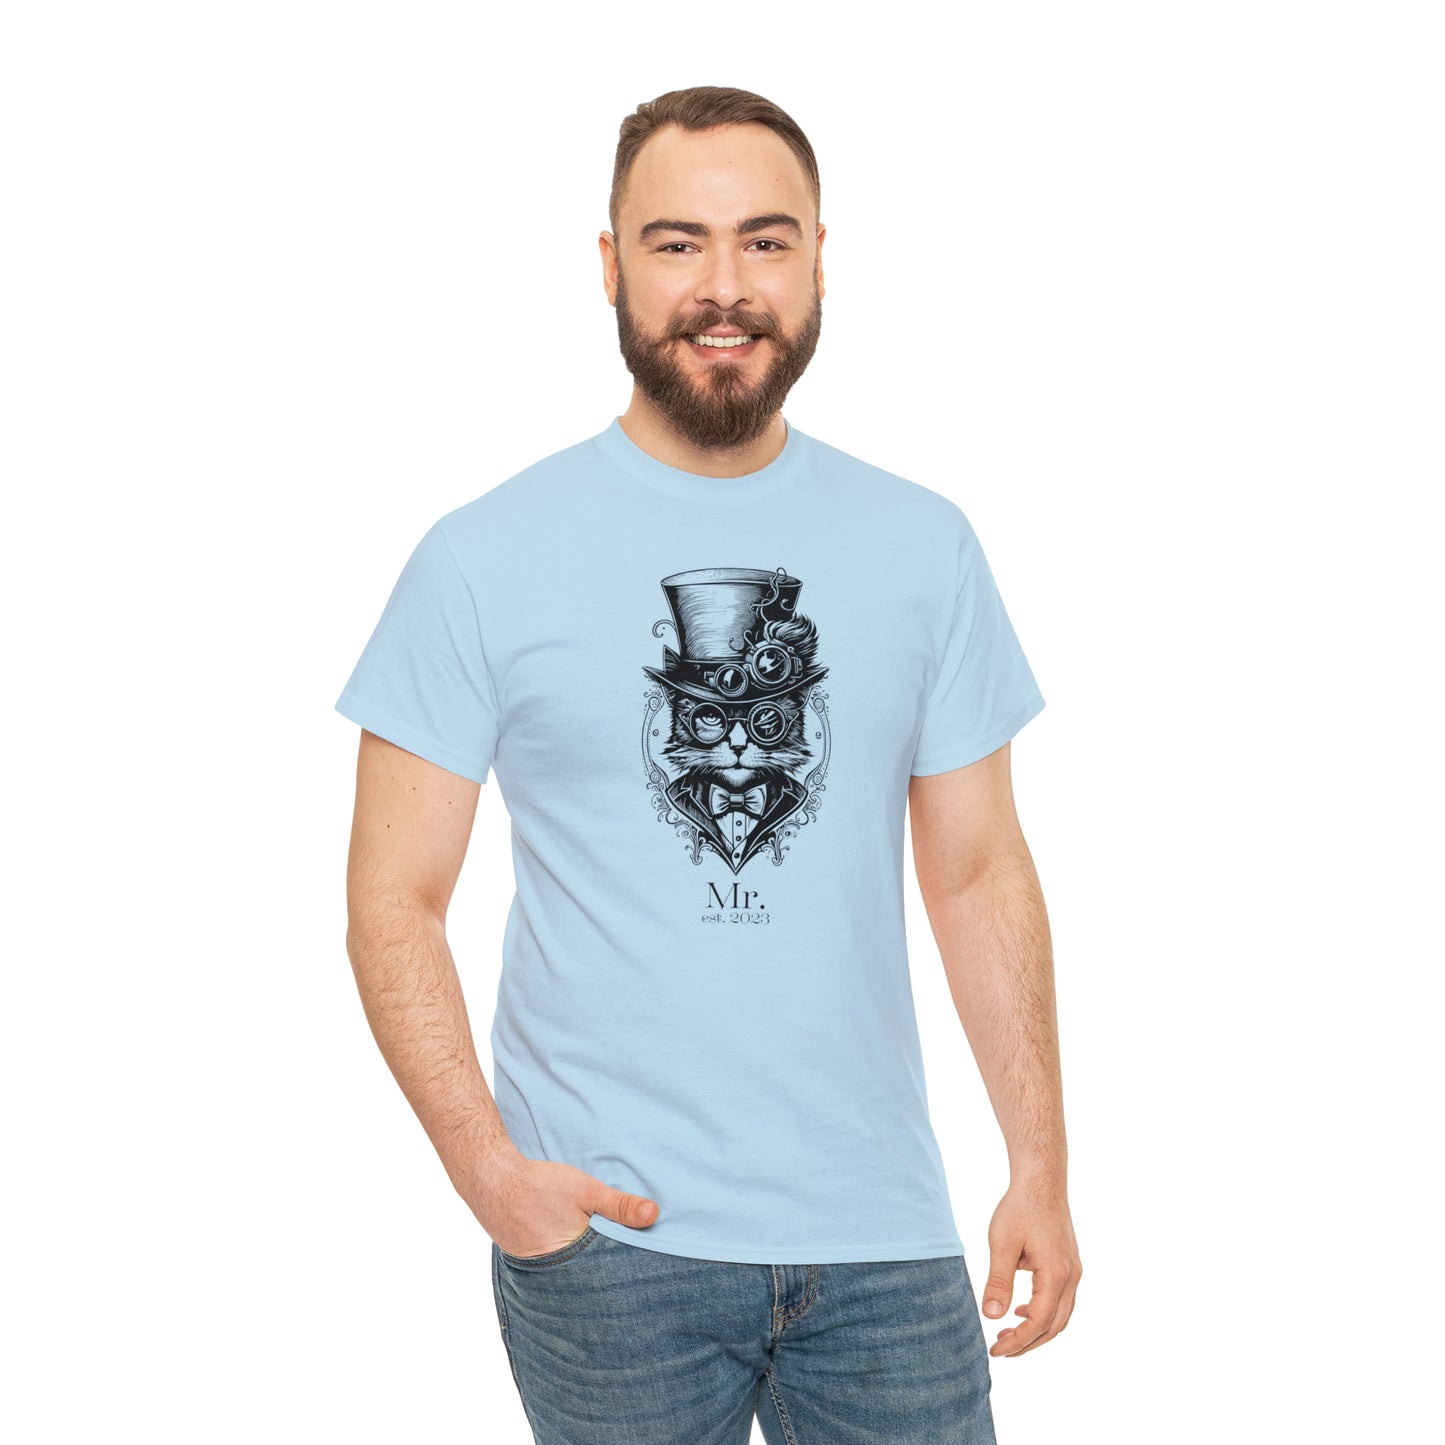 Steampunk Cat T-Shirt For Wedding T Shirt For Husband Shirt For Couples Shirts For Groom Tee For Man